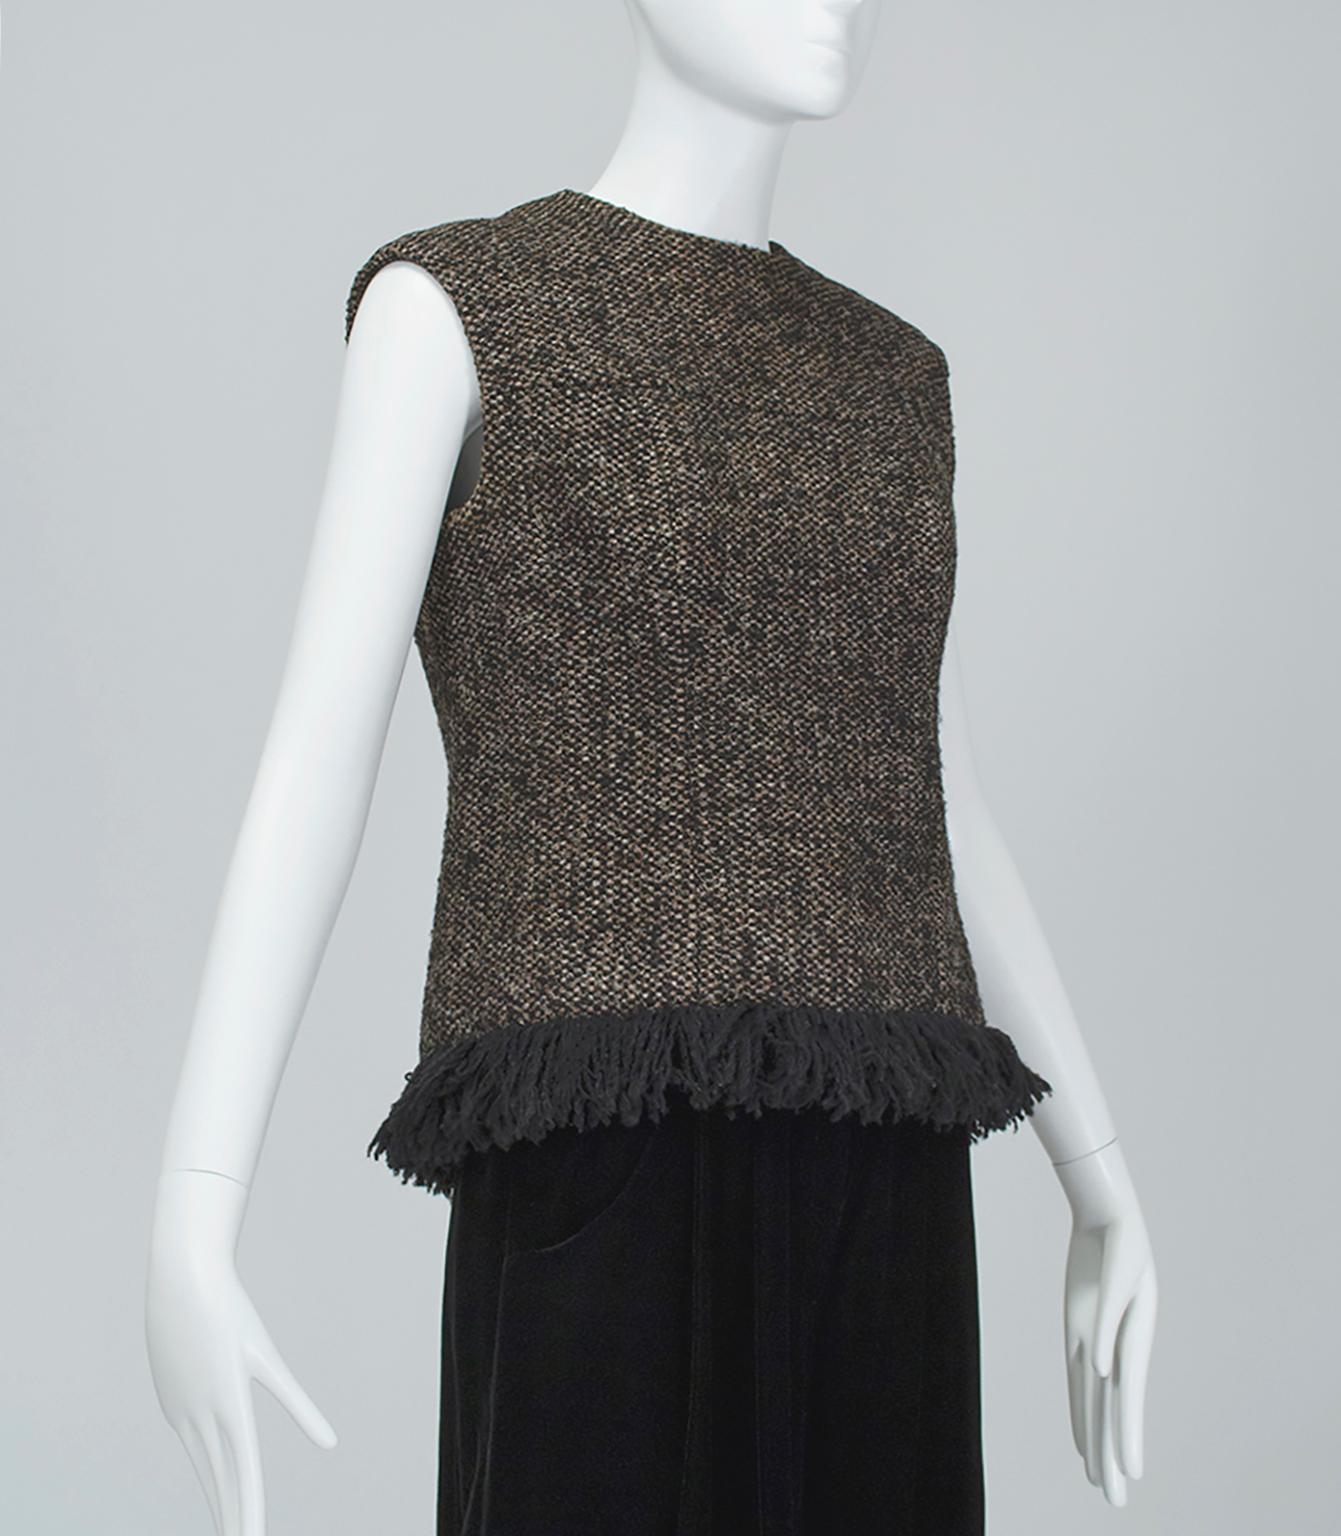 James Galanos Brown Tweed Jacket w Matching Sleeveless Fringe Top - M, 1980s In Excellent Condition For Sale In Tucson, AZ